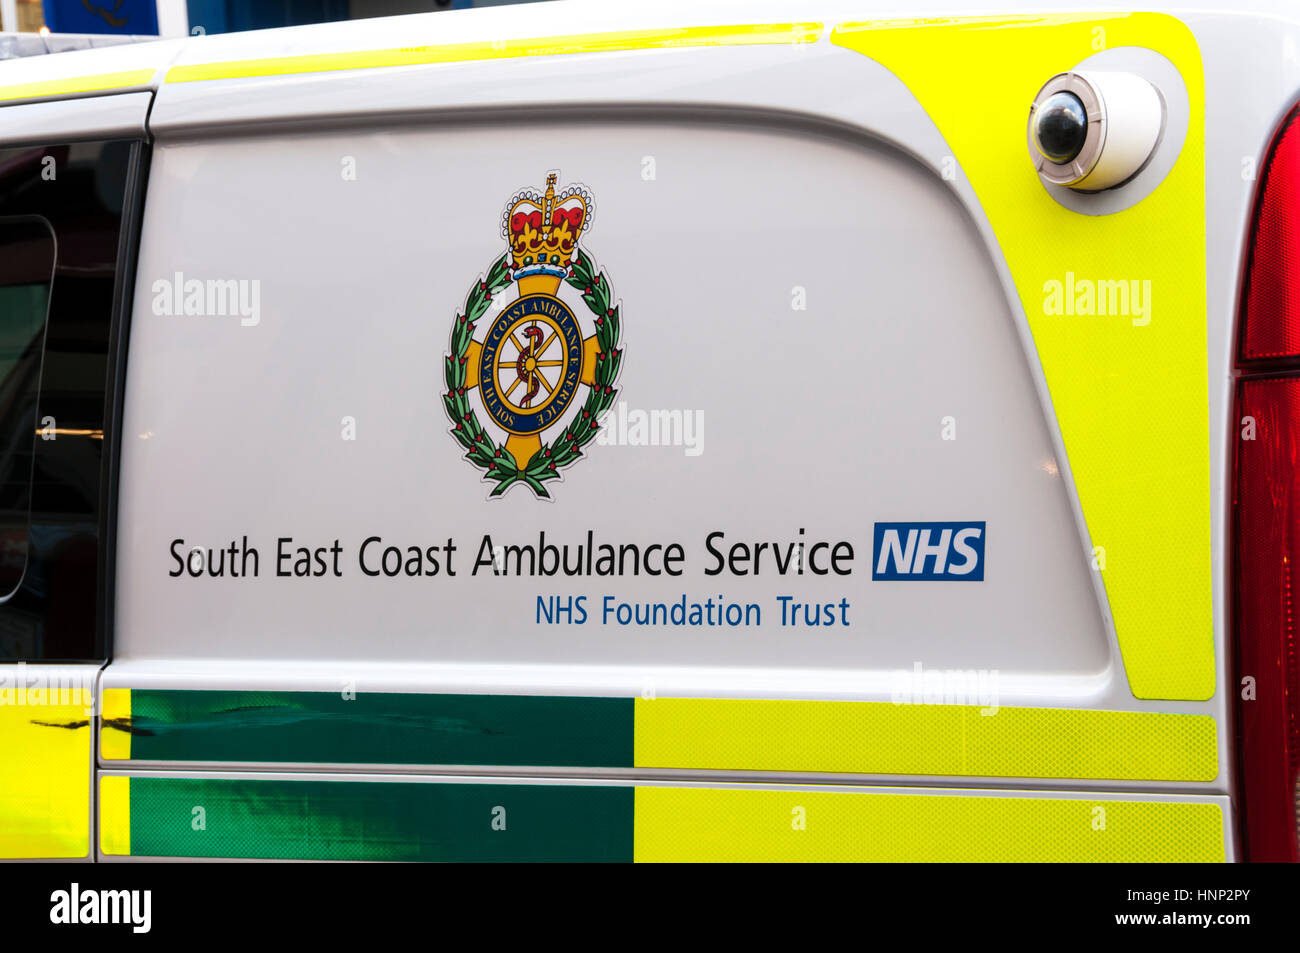 Logo and name of South East Coast Ambulance Service NHS Foundation Trust on the side of a paramedic ambulance. Stock Photo